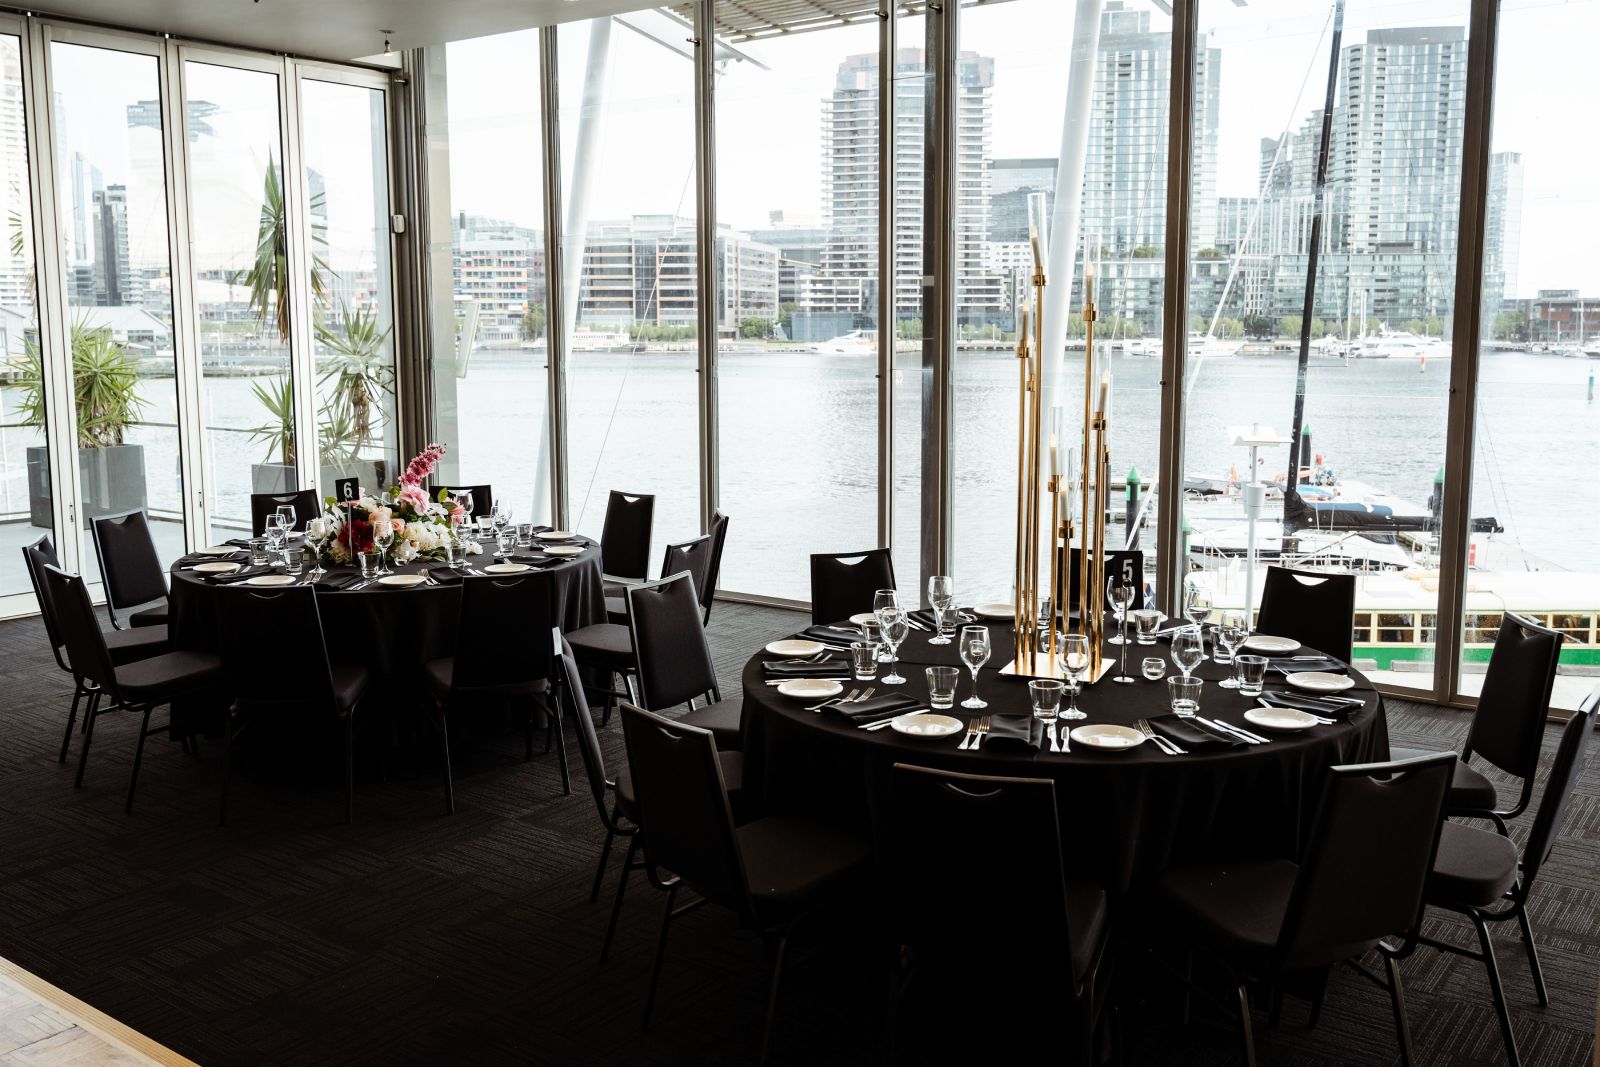 A beautifully decorated room at The Promenade Docklands, ready for a dinner party with tables and chairs set up.